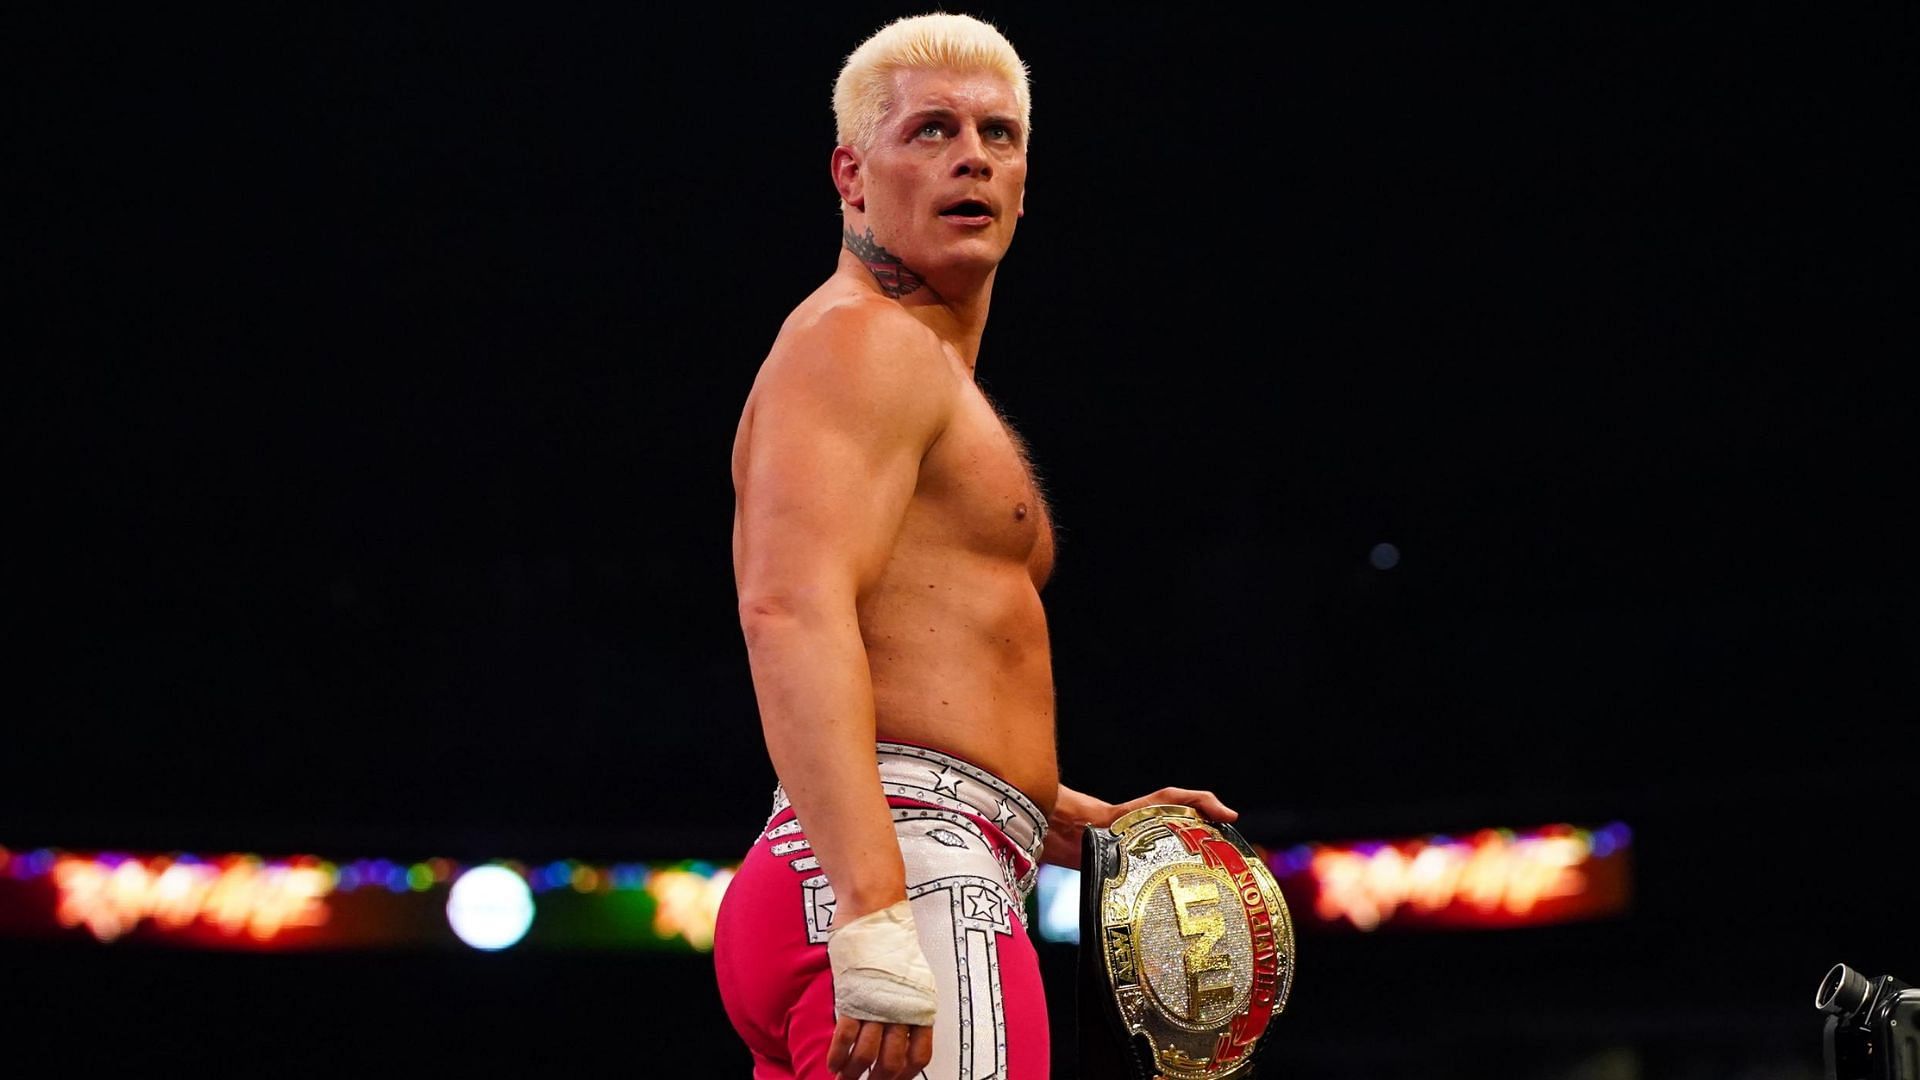 Cody Rhodes held the TNT Championship a record 3-times.